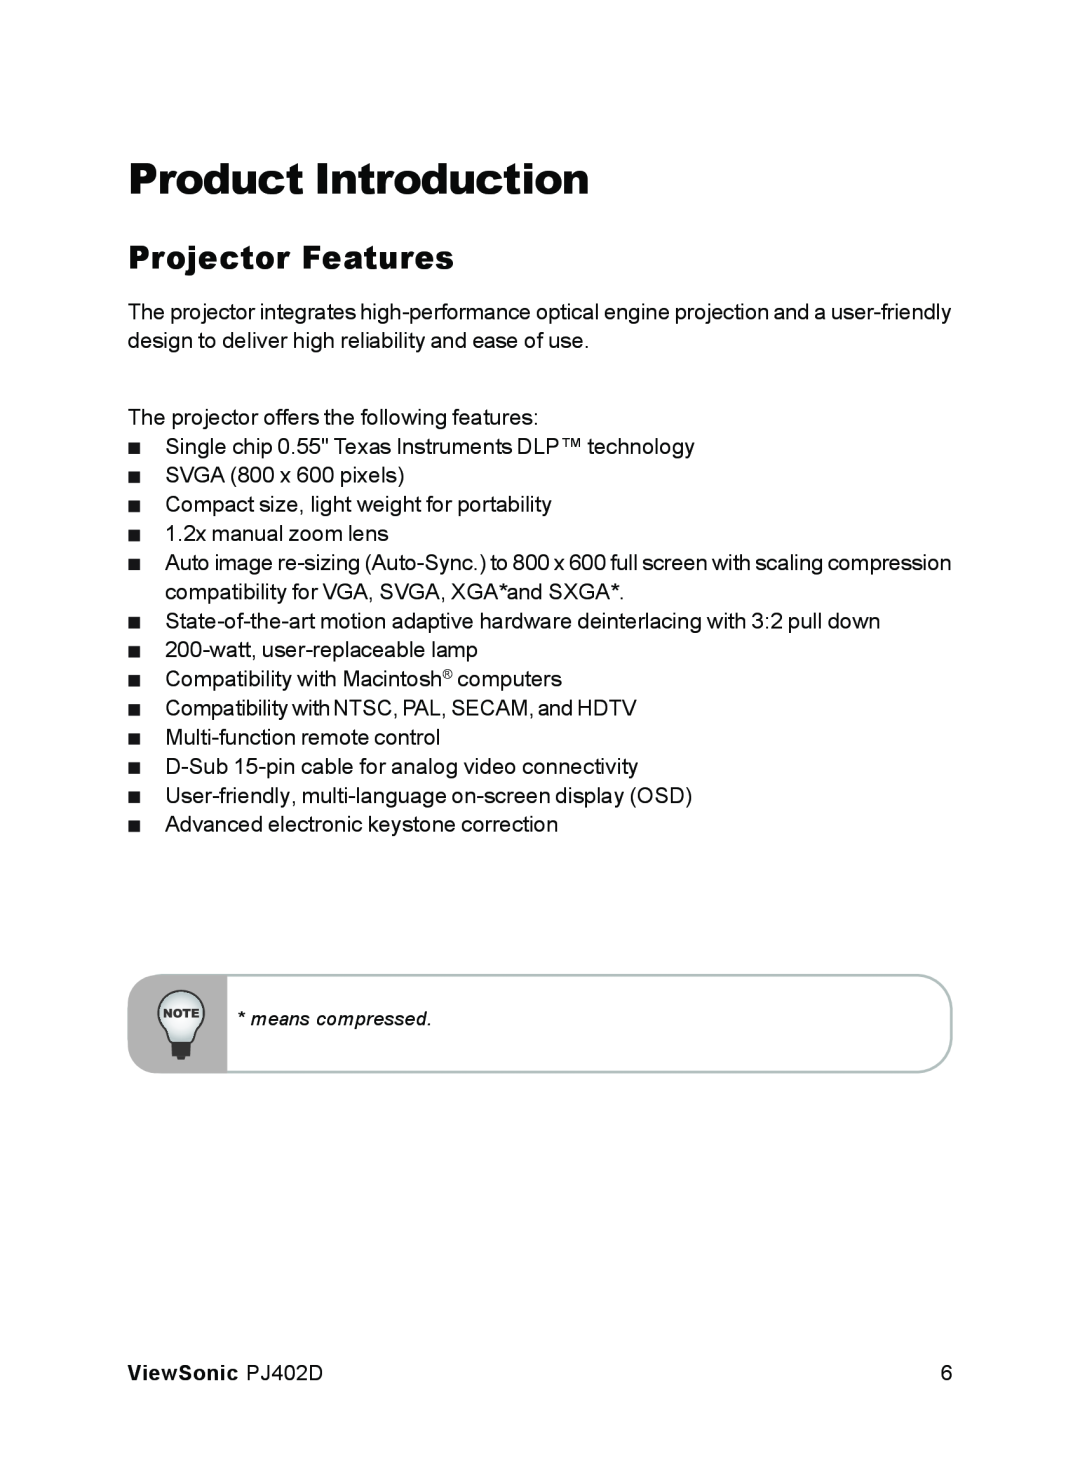 ViewSonic PJ402D manual Product Introduction, Projector Features 